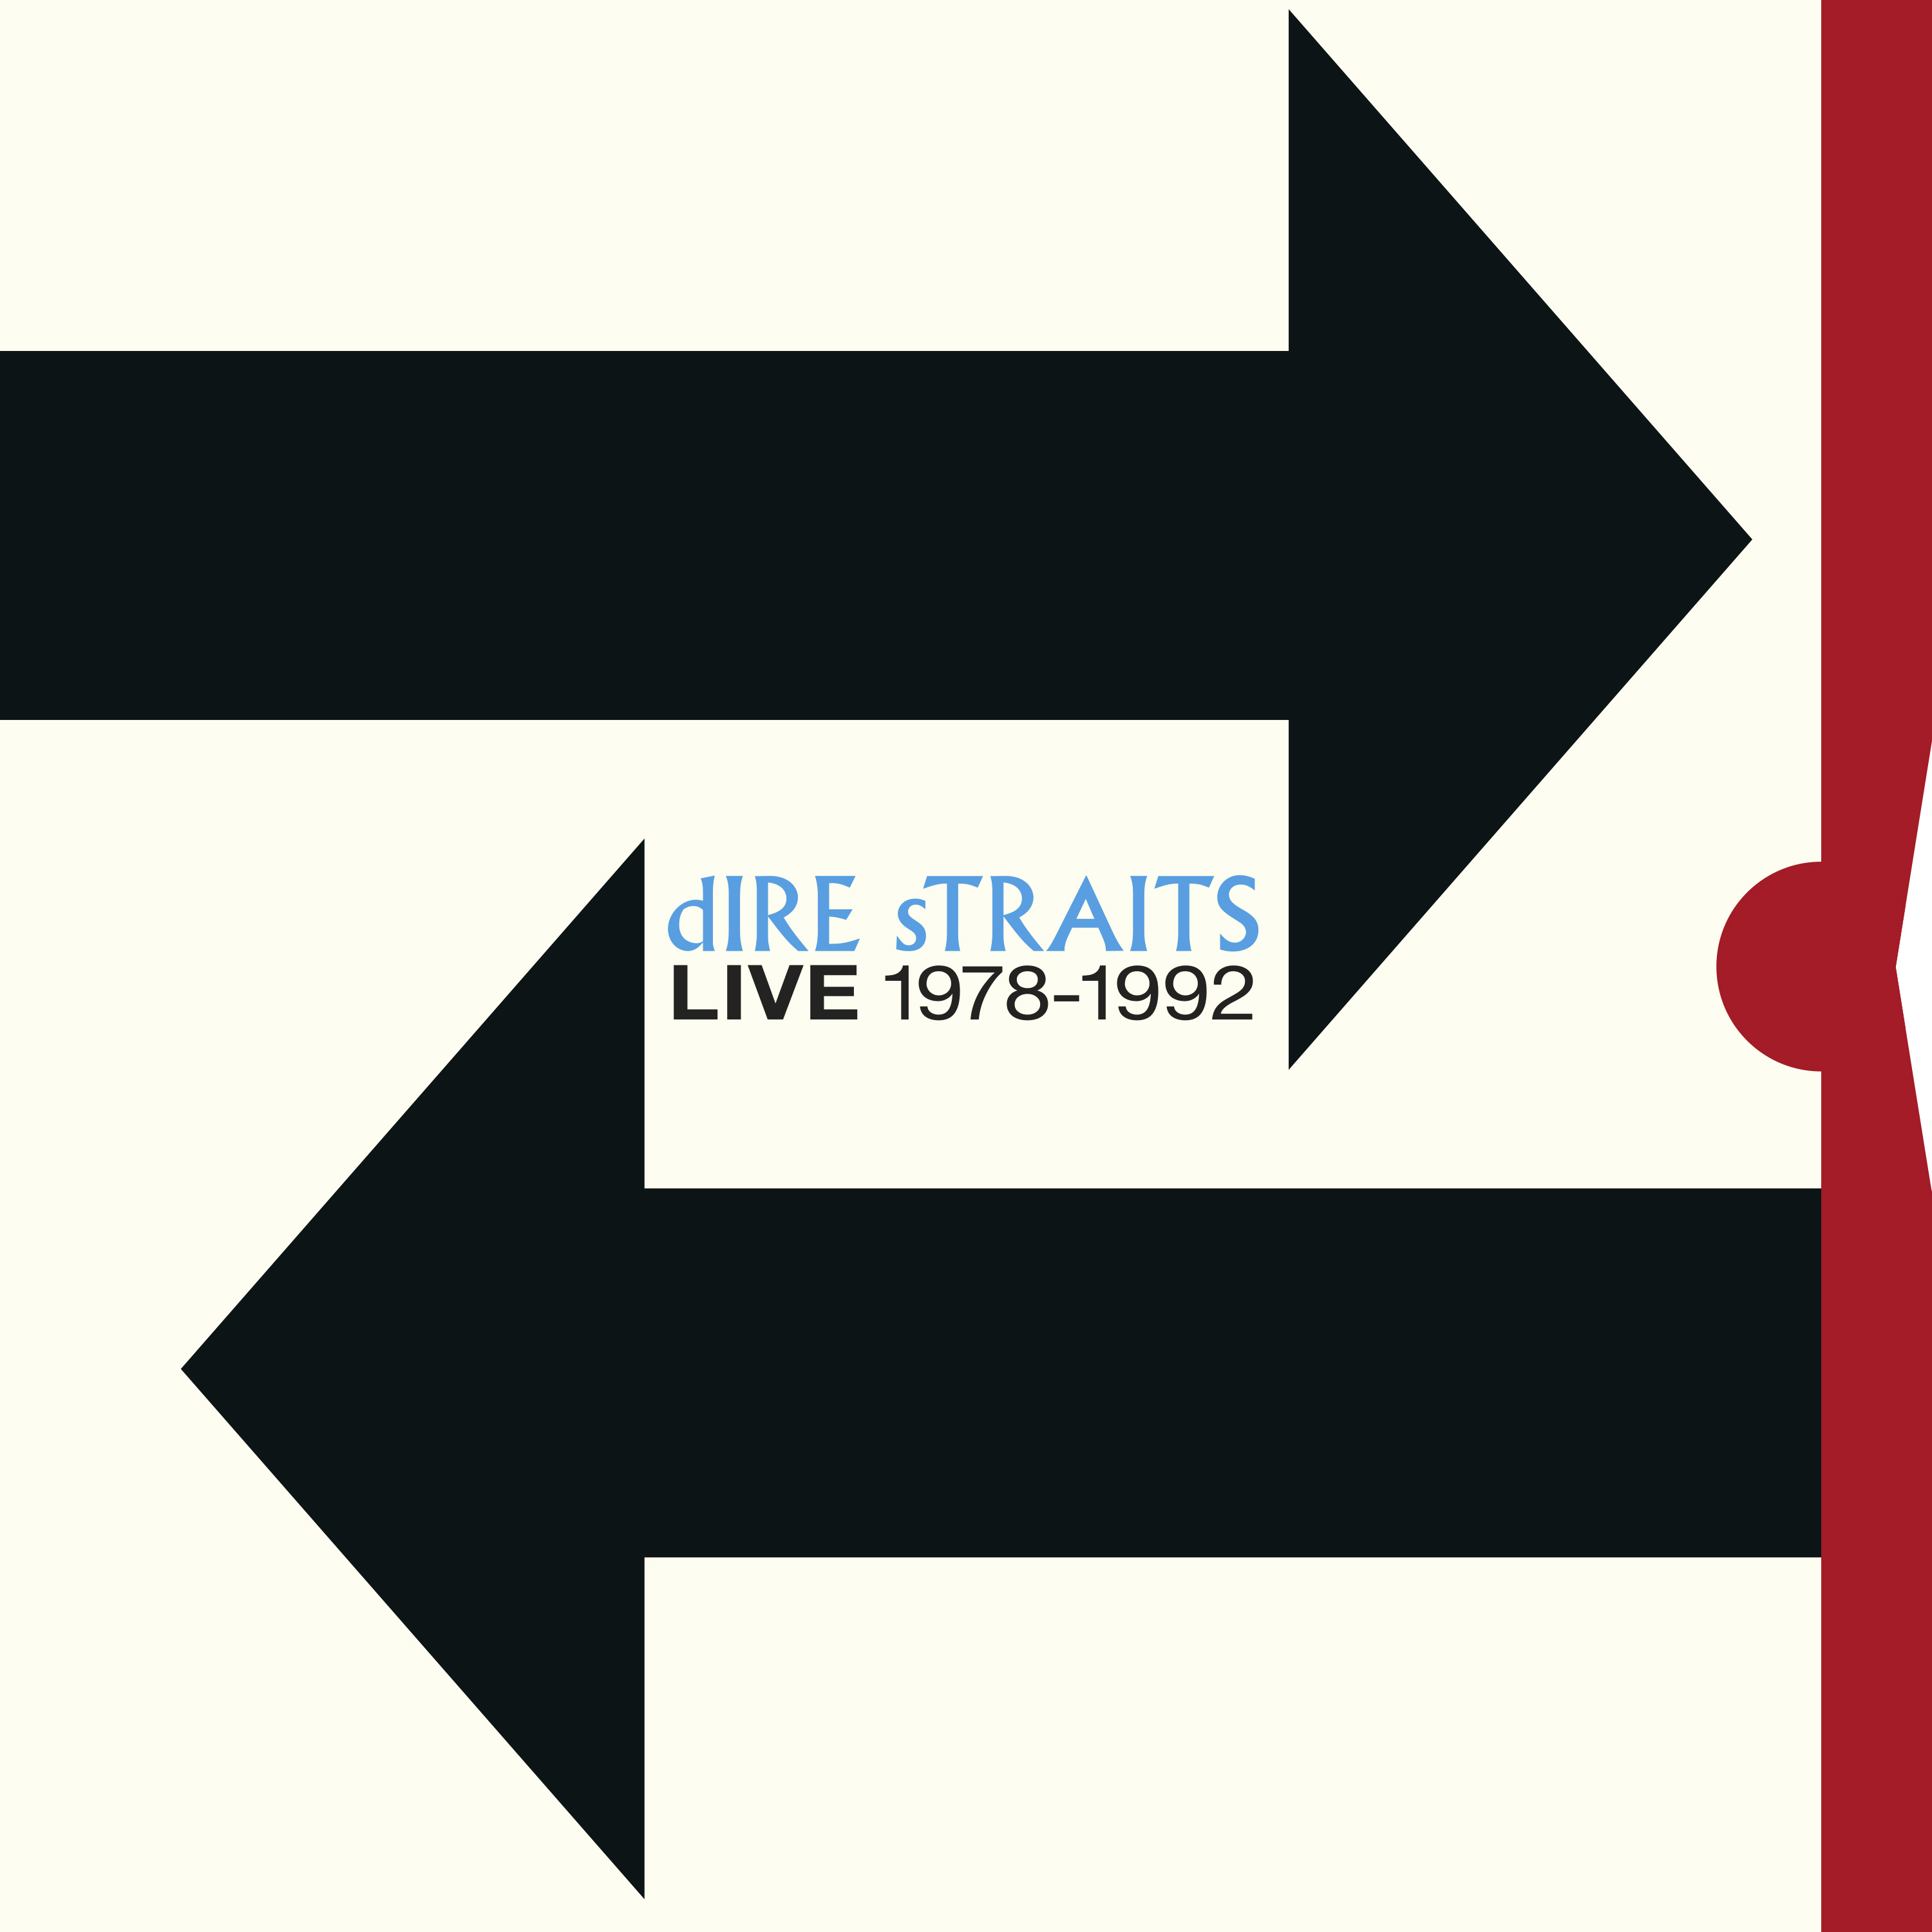 Music Review: Tour through Dire Straits' live output with new box